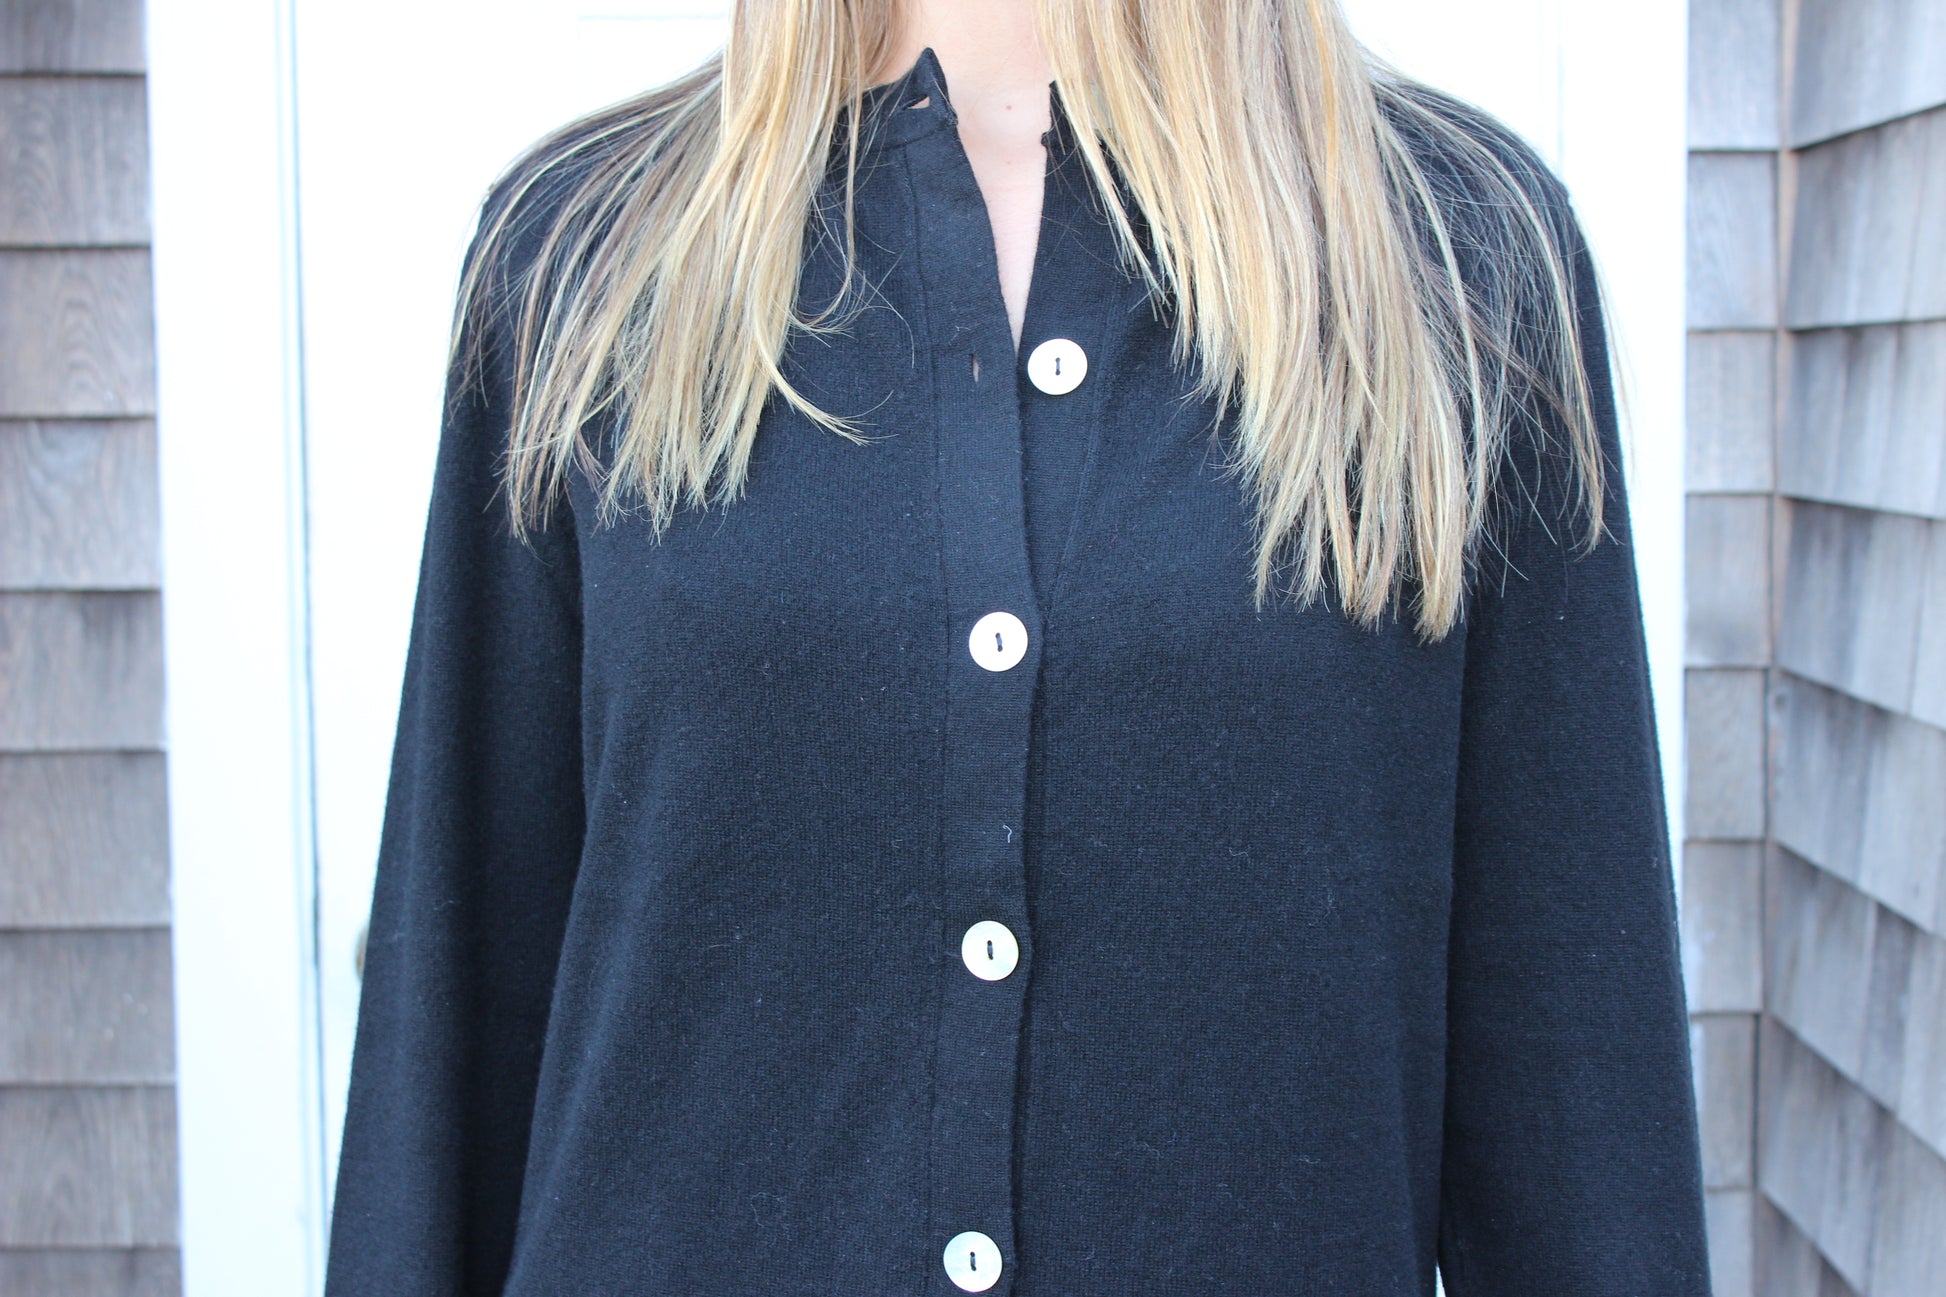  Long sweater button down   100% cashmere  Made in Italy